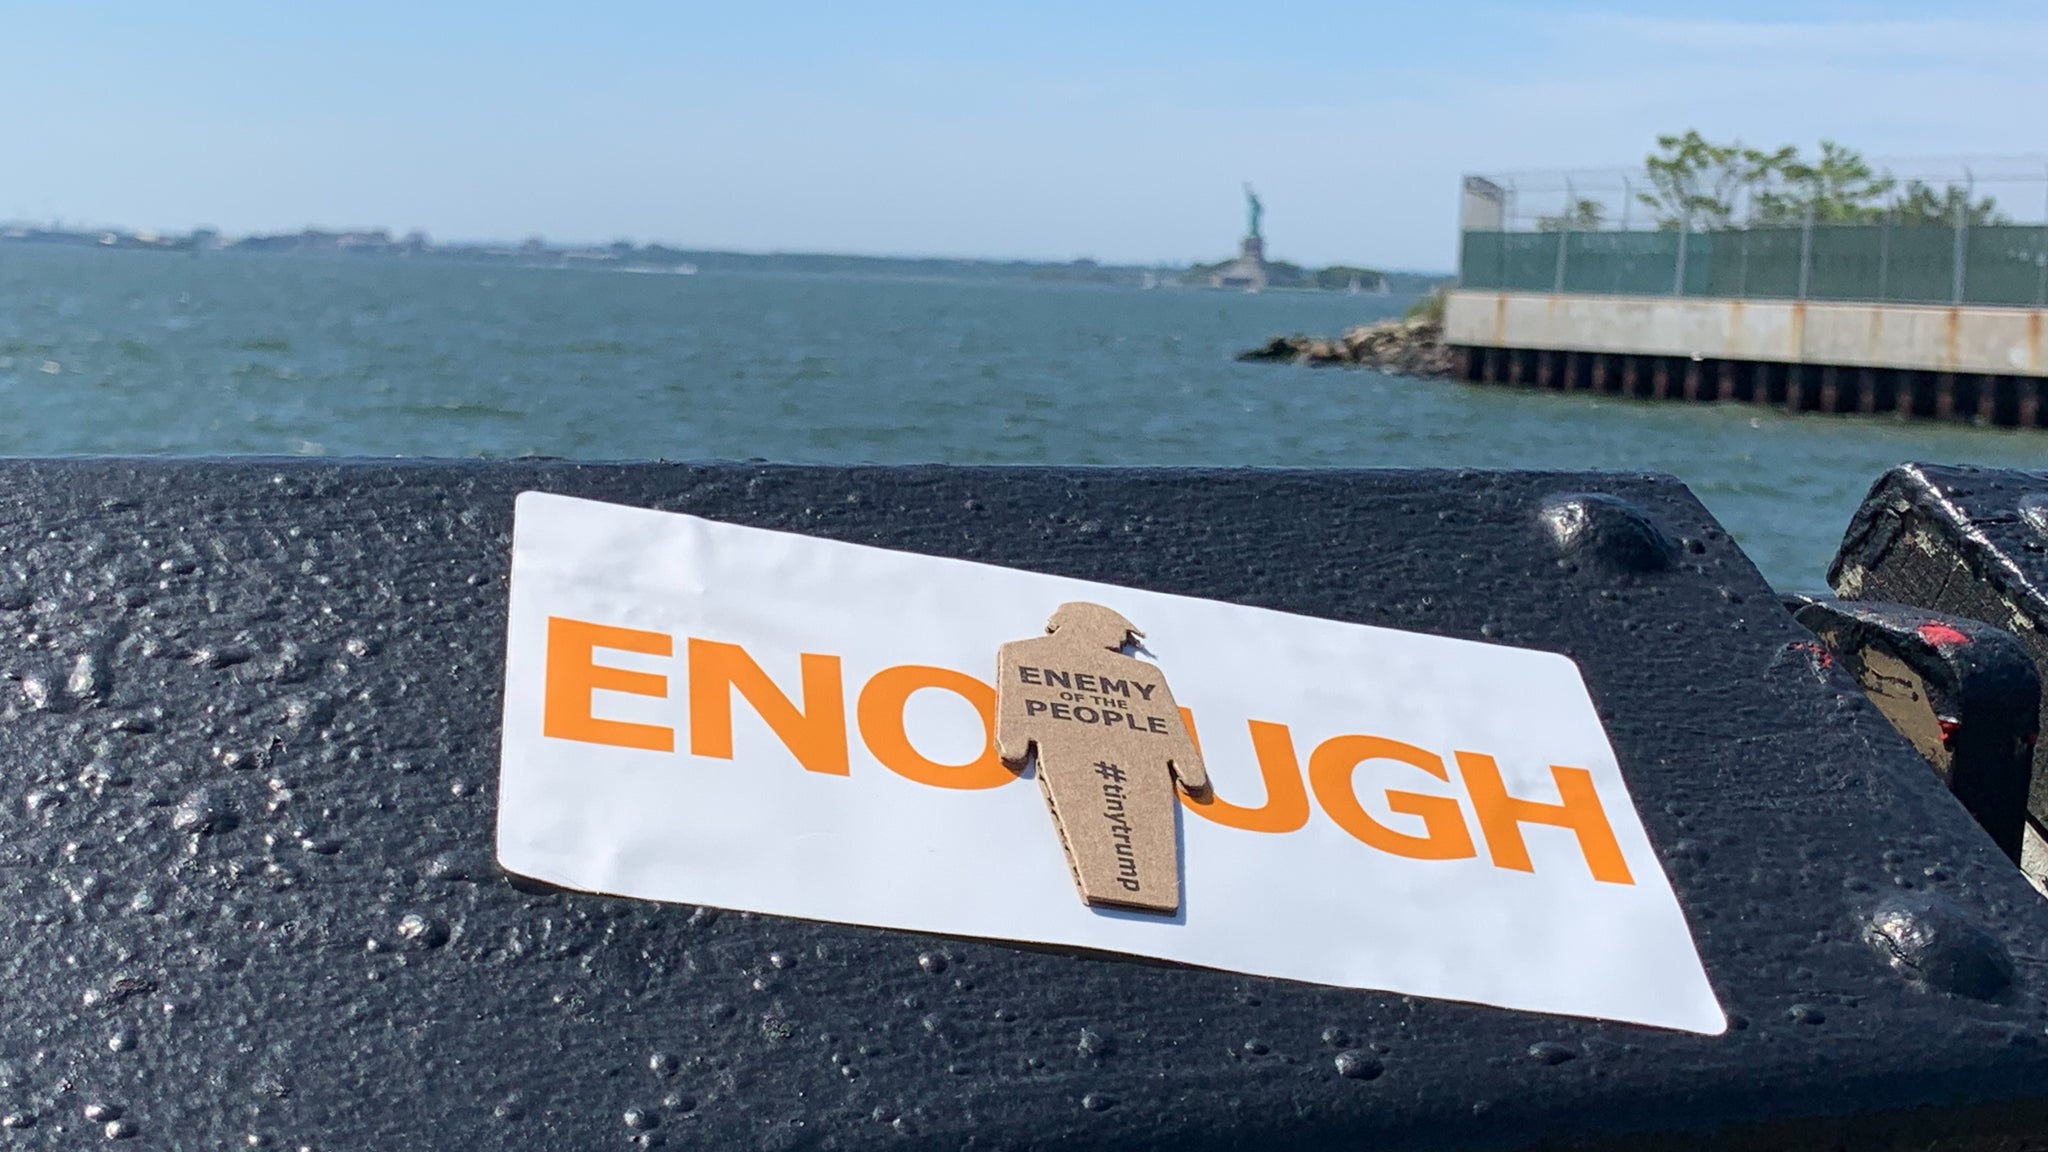 "ENOUGH" tiny trump sticker measuring 3.75" x 7.5" shown stuck to a railing with the Statue of Liberty in the background